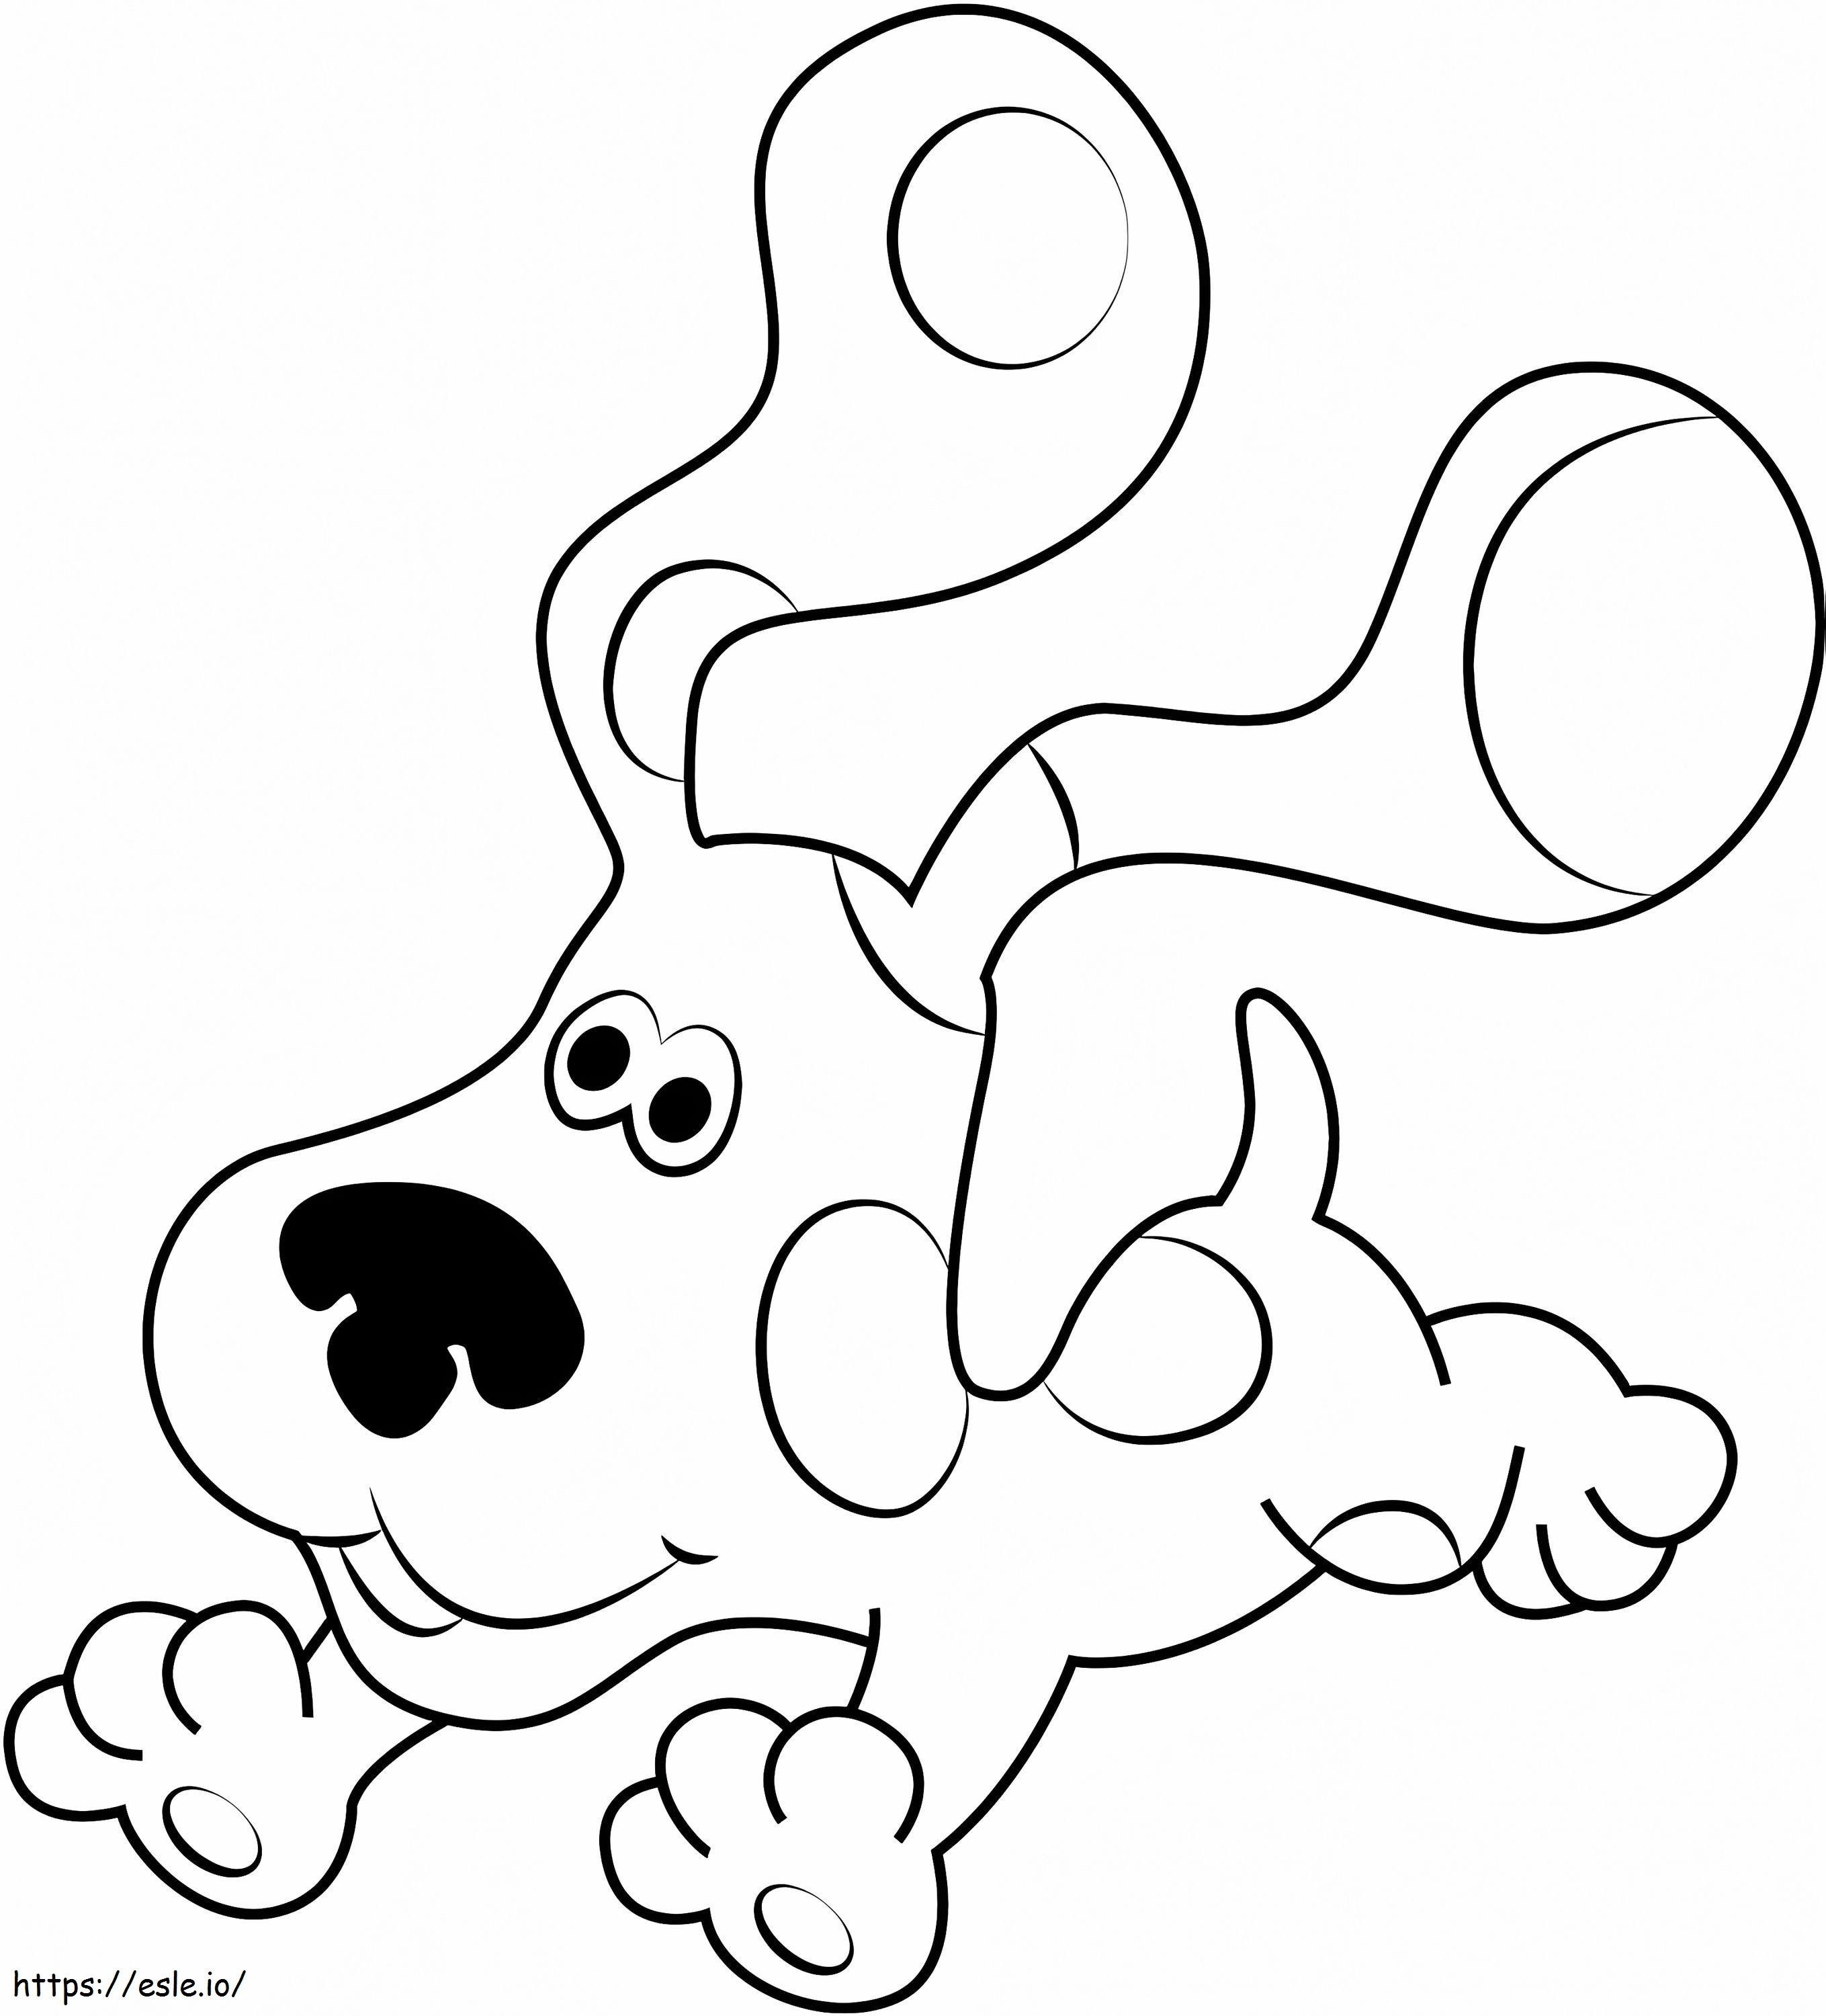 Blue Clues Running A4Coloring Page coloring page